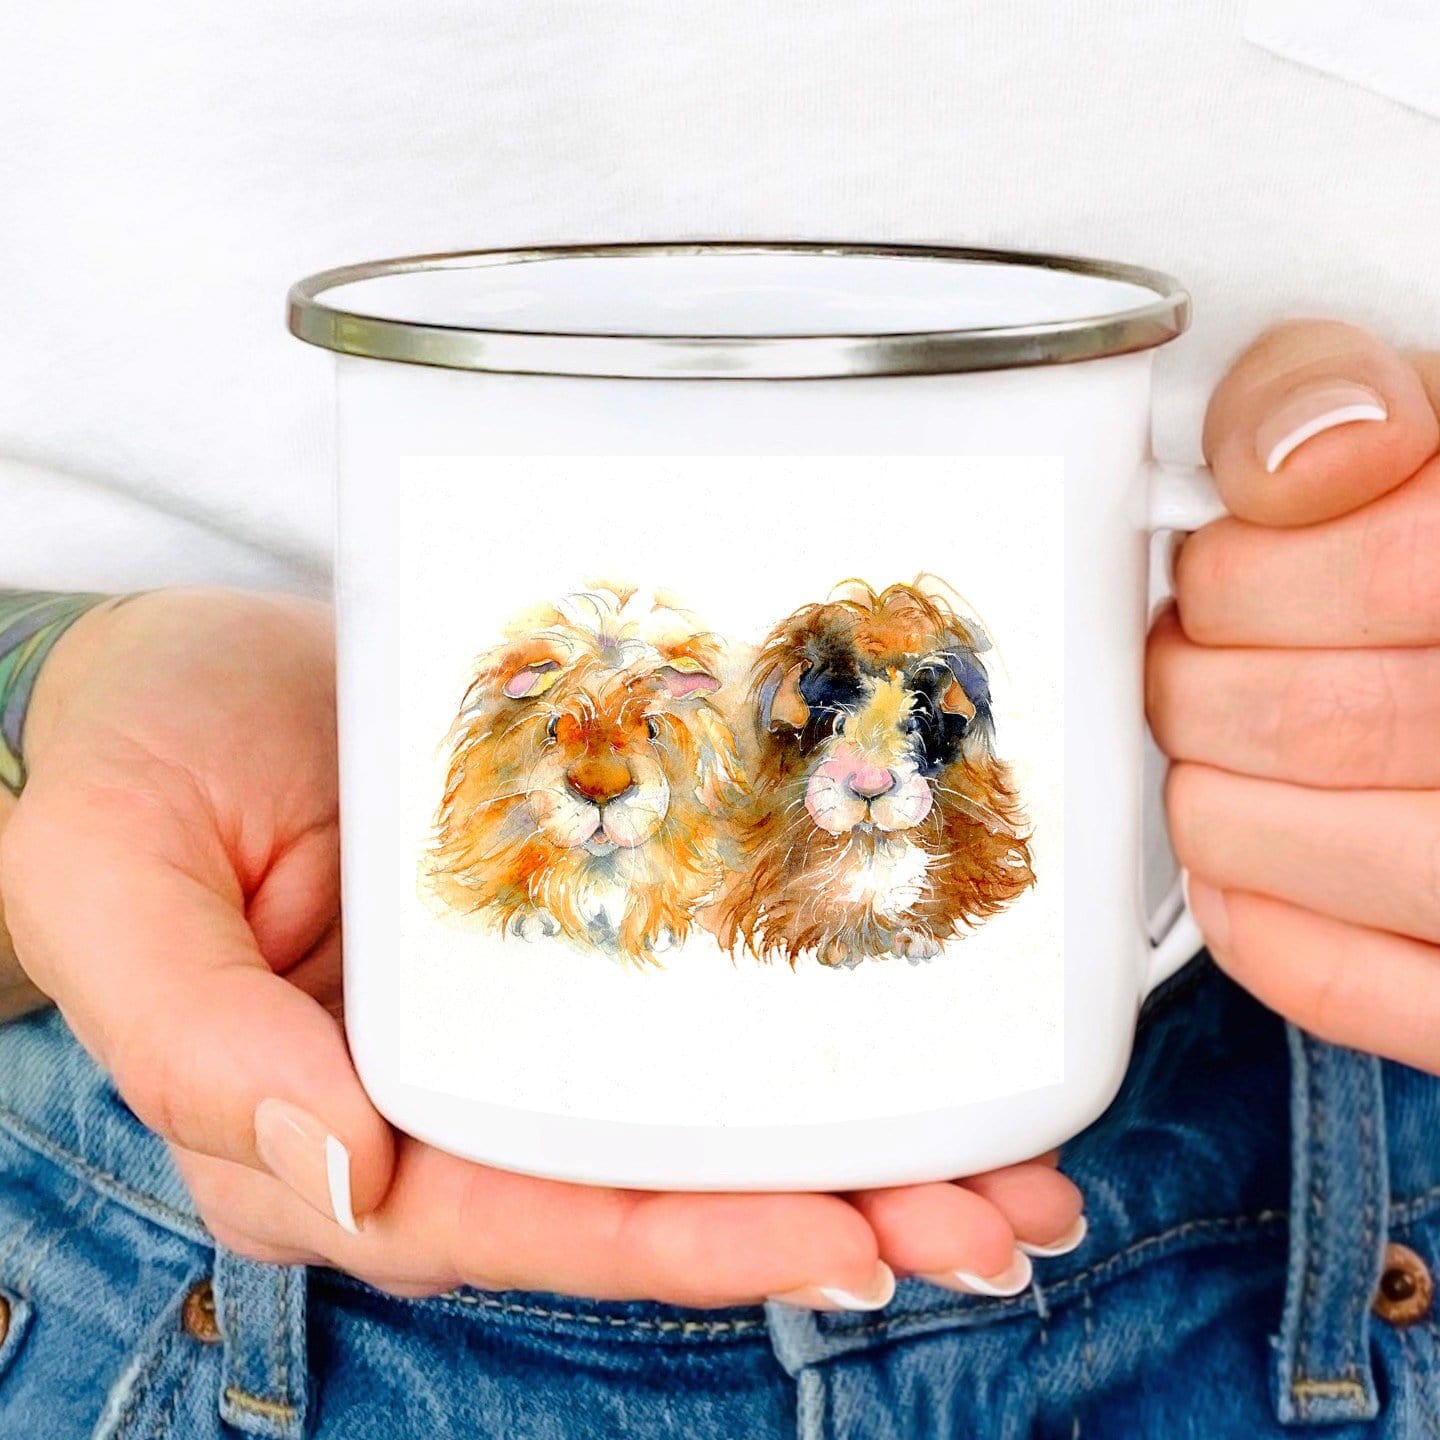 Cute pet brown and white Guinea Pigs Enamel Tin Mug Watercolour painted design by Sheila Gill
